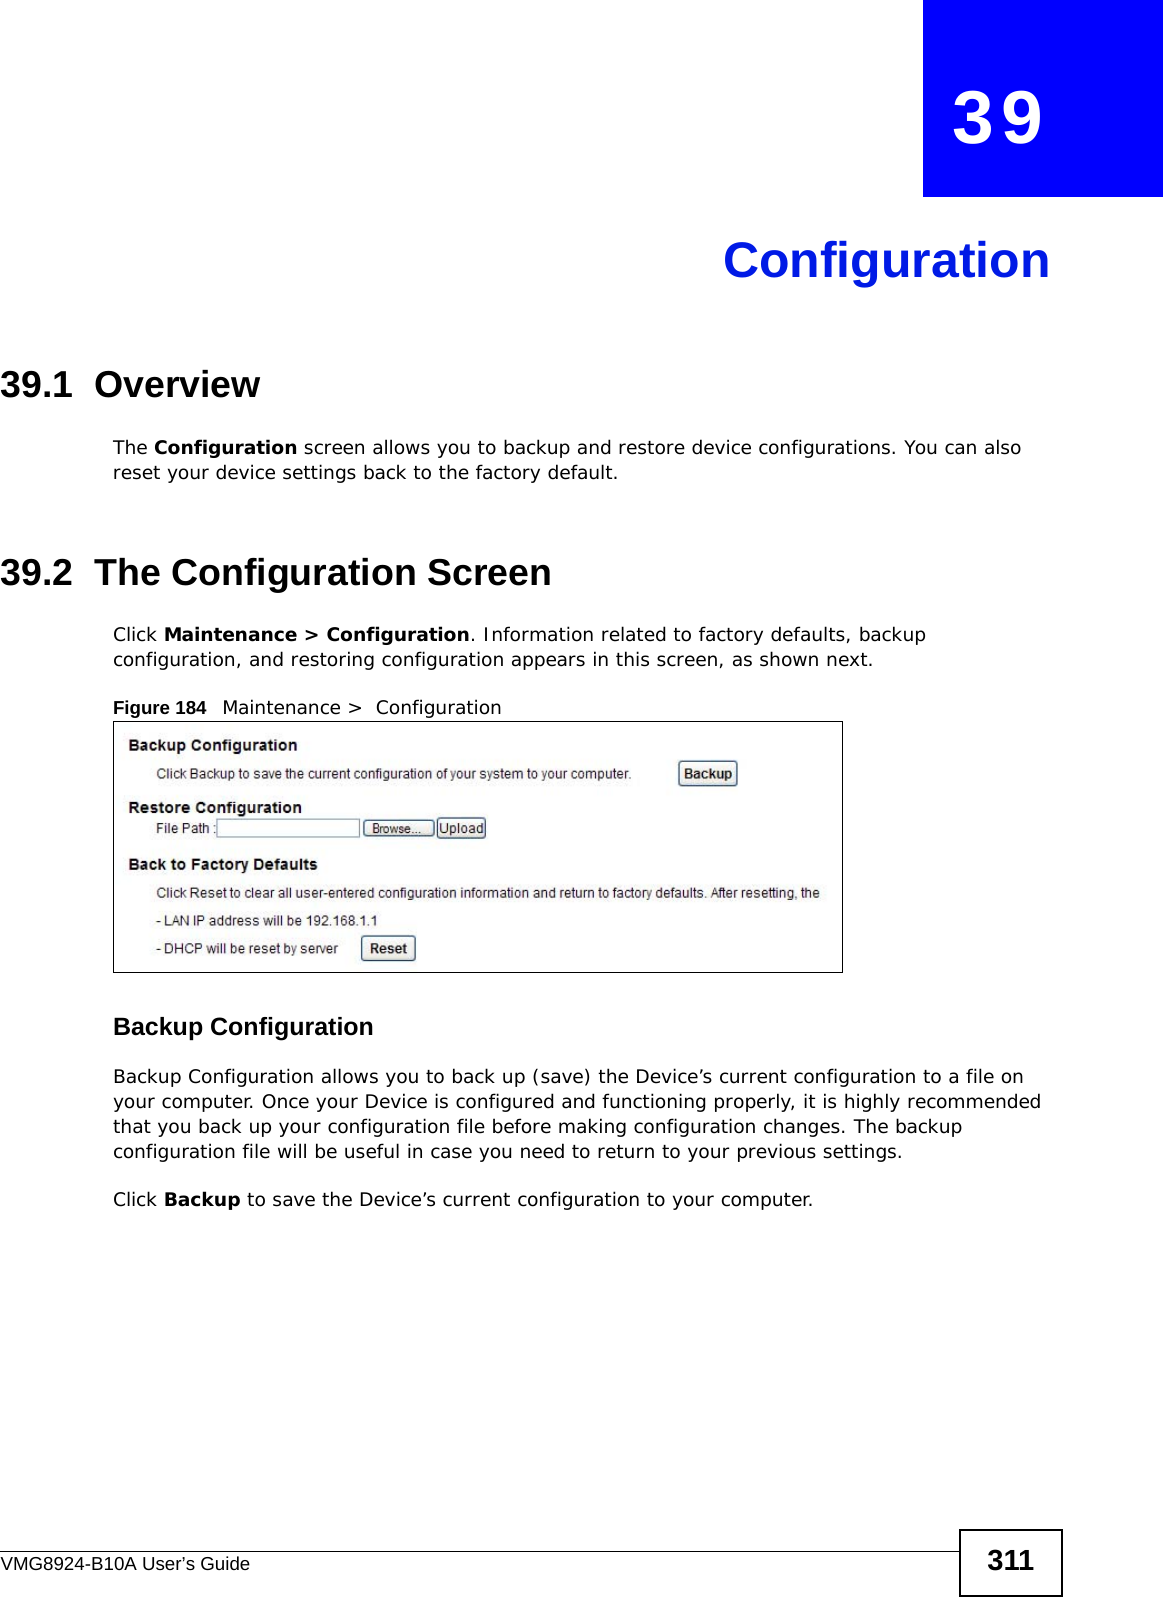 VMG8924-B10A User’s Guide 311CHAPTER   39Configuration39.1  OverviewThe Configuration screen allows you to backup and restore device configurations. You can also reset your device settings back to the factory default.39.2  The Configuration Screen Click Maintenance &gt; Configuration. Information related to factory defaults, backup configuration, and restoring configuration appears in this screen, as shown next.Figure 184   Maintenance &gt;  ConfigurationBackup Configuration Backup Configuration allows you to back up (save) the Device’s current configuration to a file on your computer. Once your Device is configured and functioning properly, it is highly recommended that you back up your configuration file before making configuration changes. The backup configuration file will be useful in case you need to return to your previous settings. Click Backup to save the Device’s current configuration to your computer.